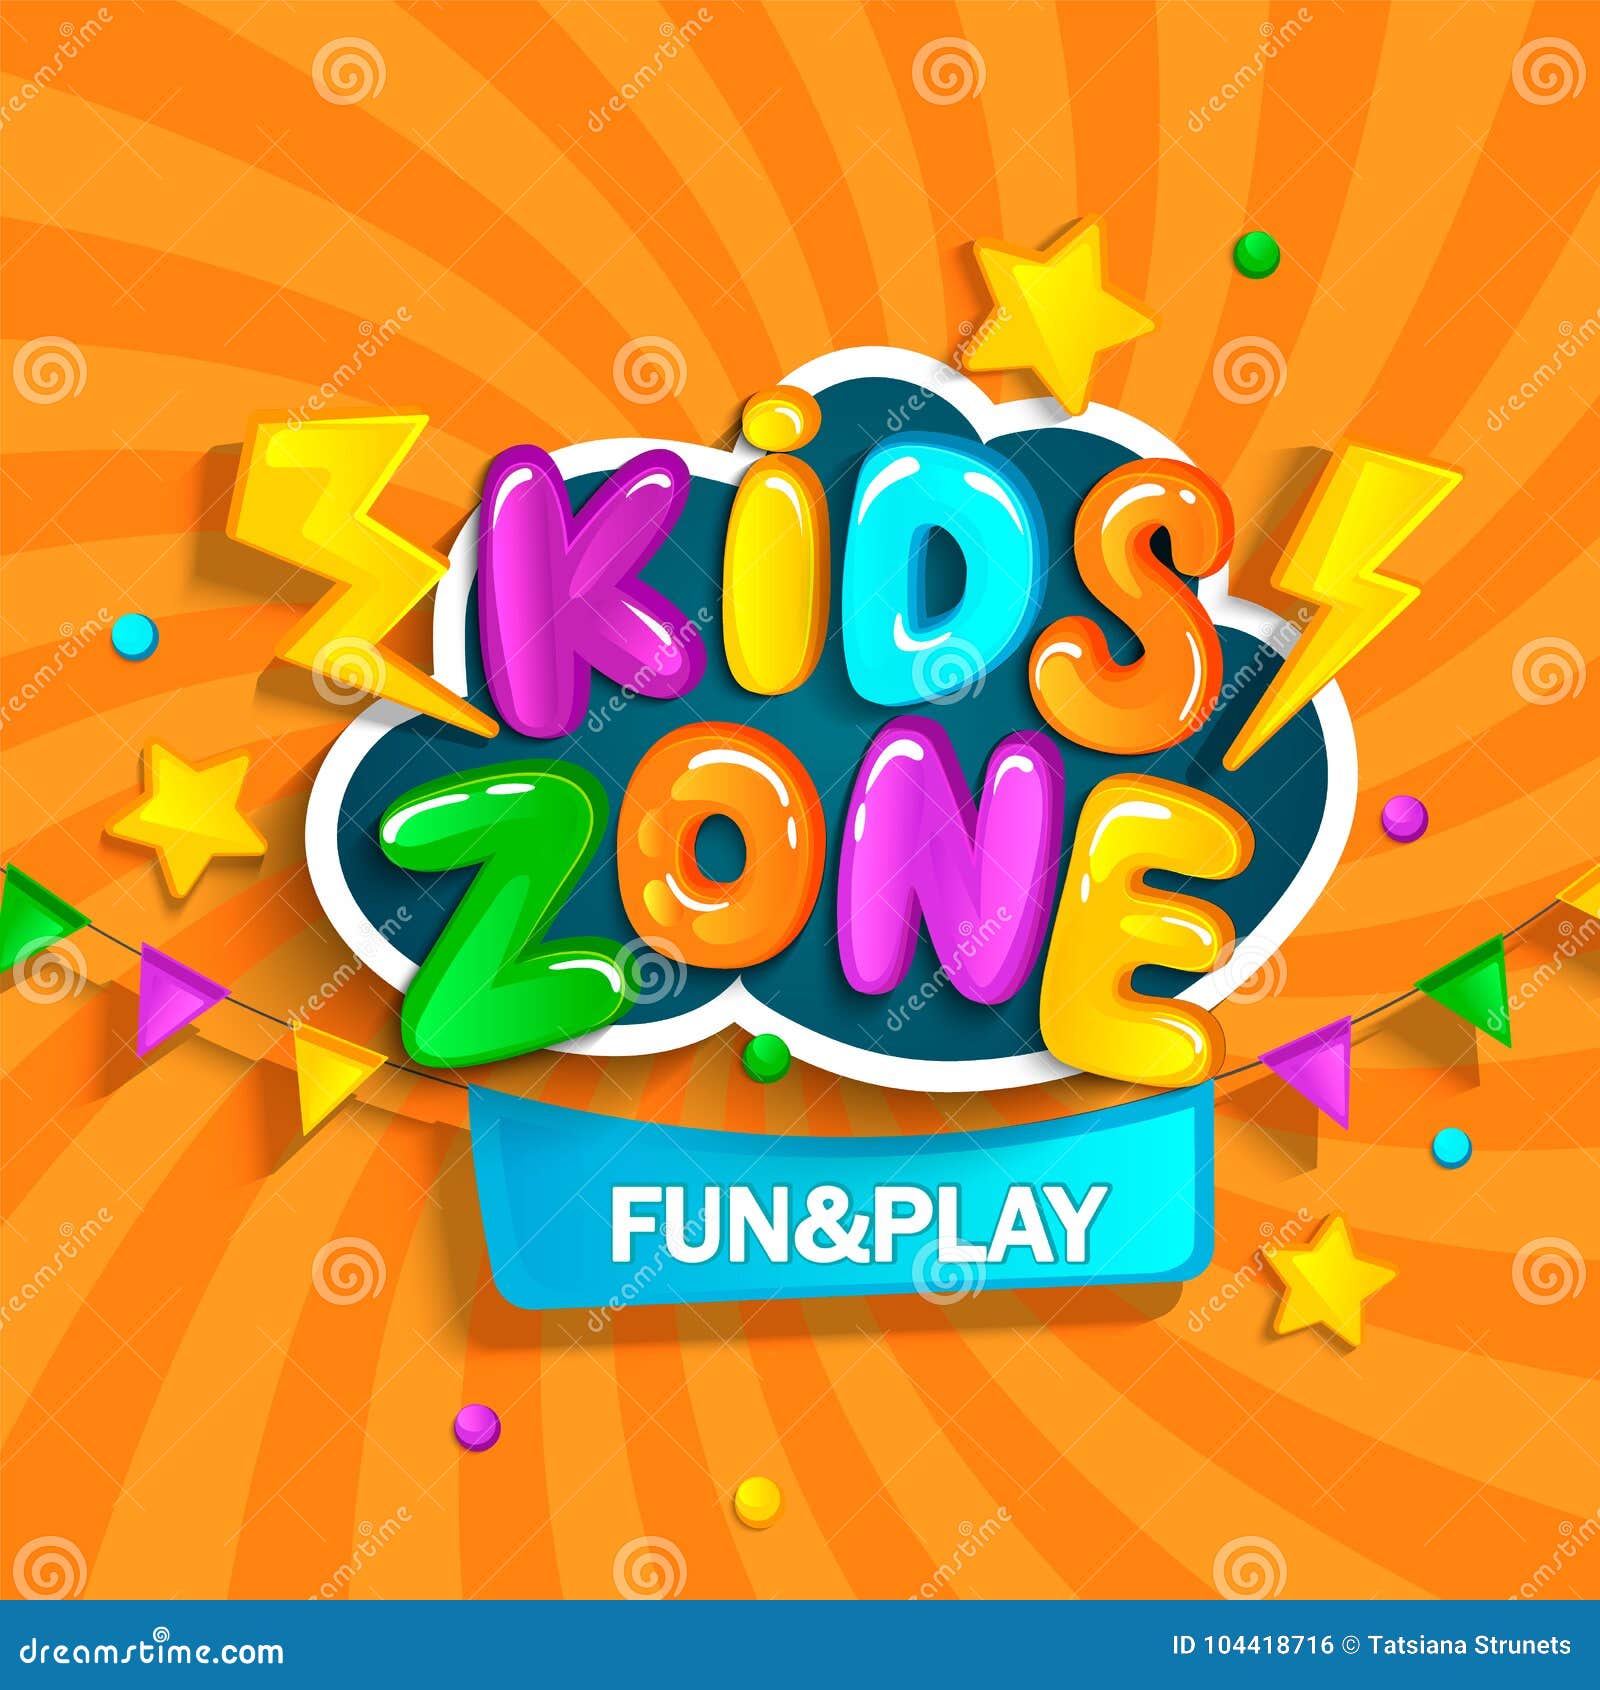 banner for kids zone.